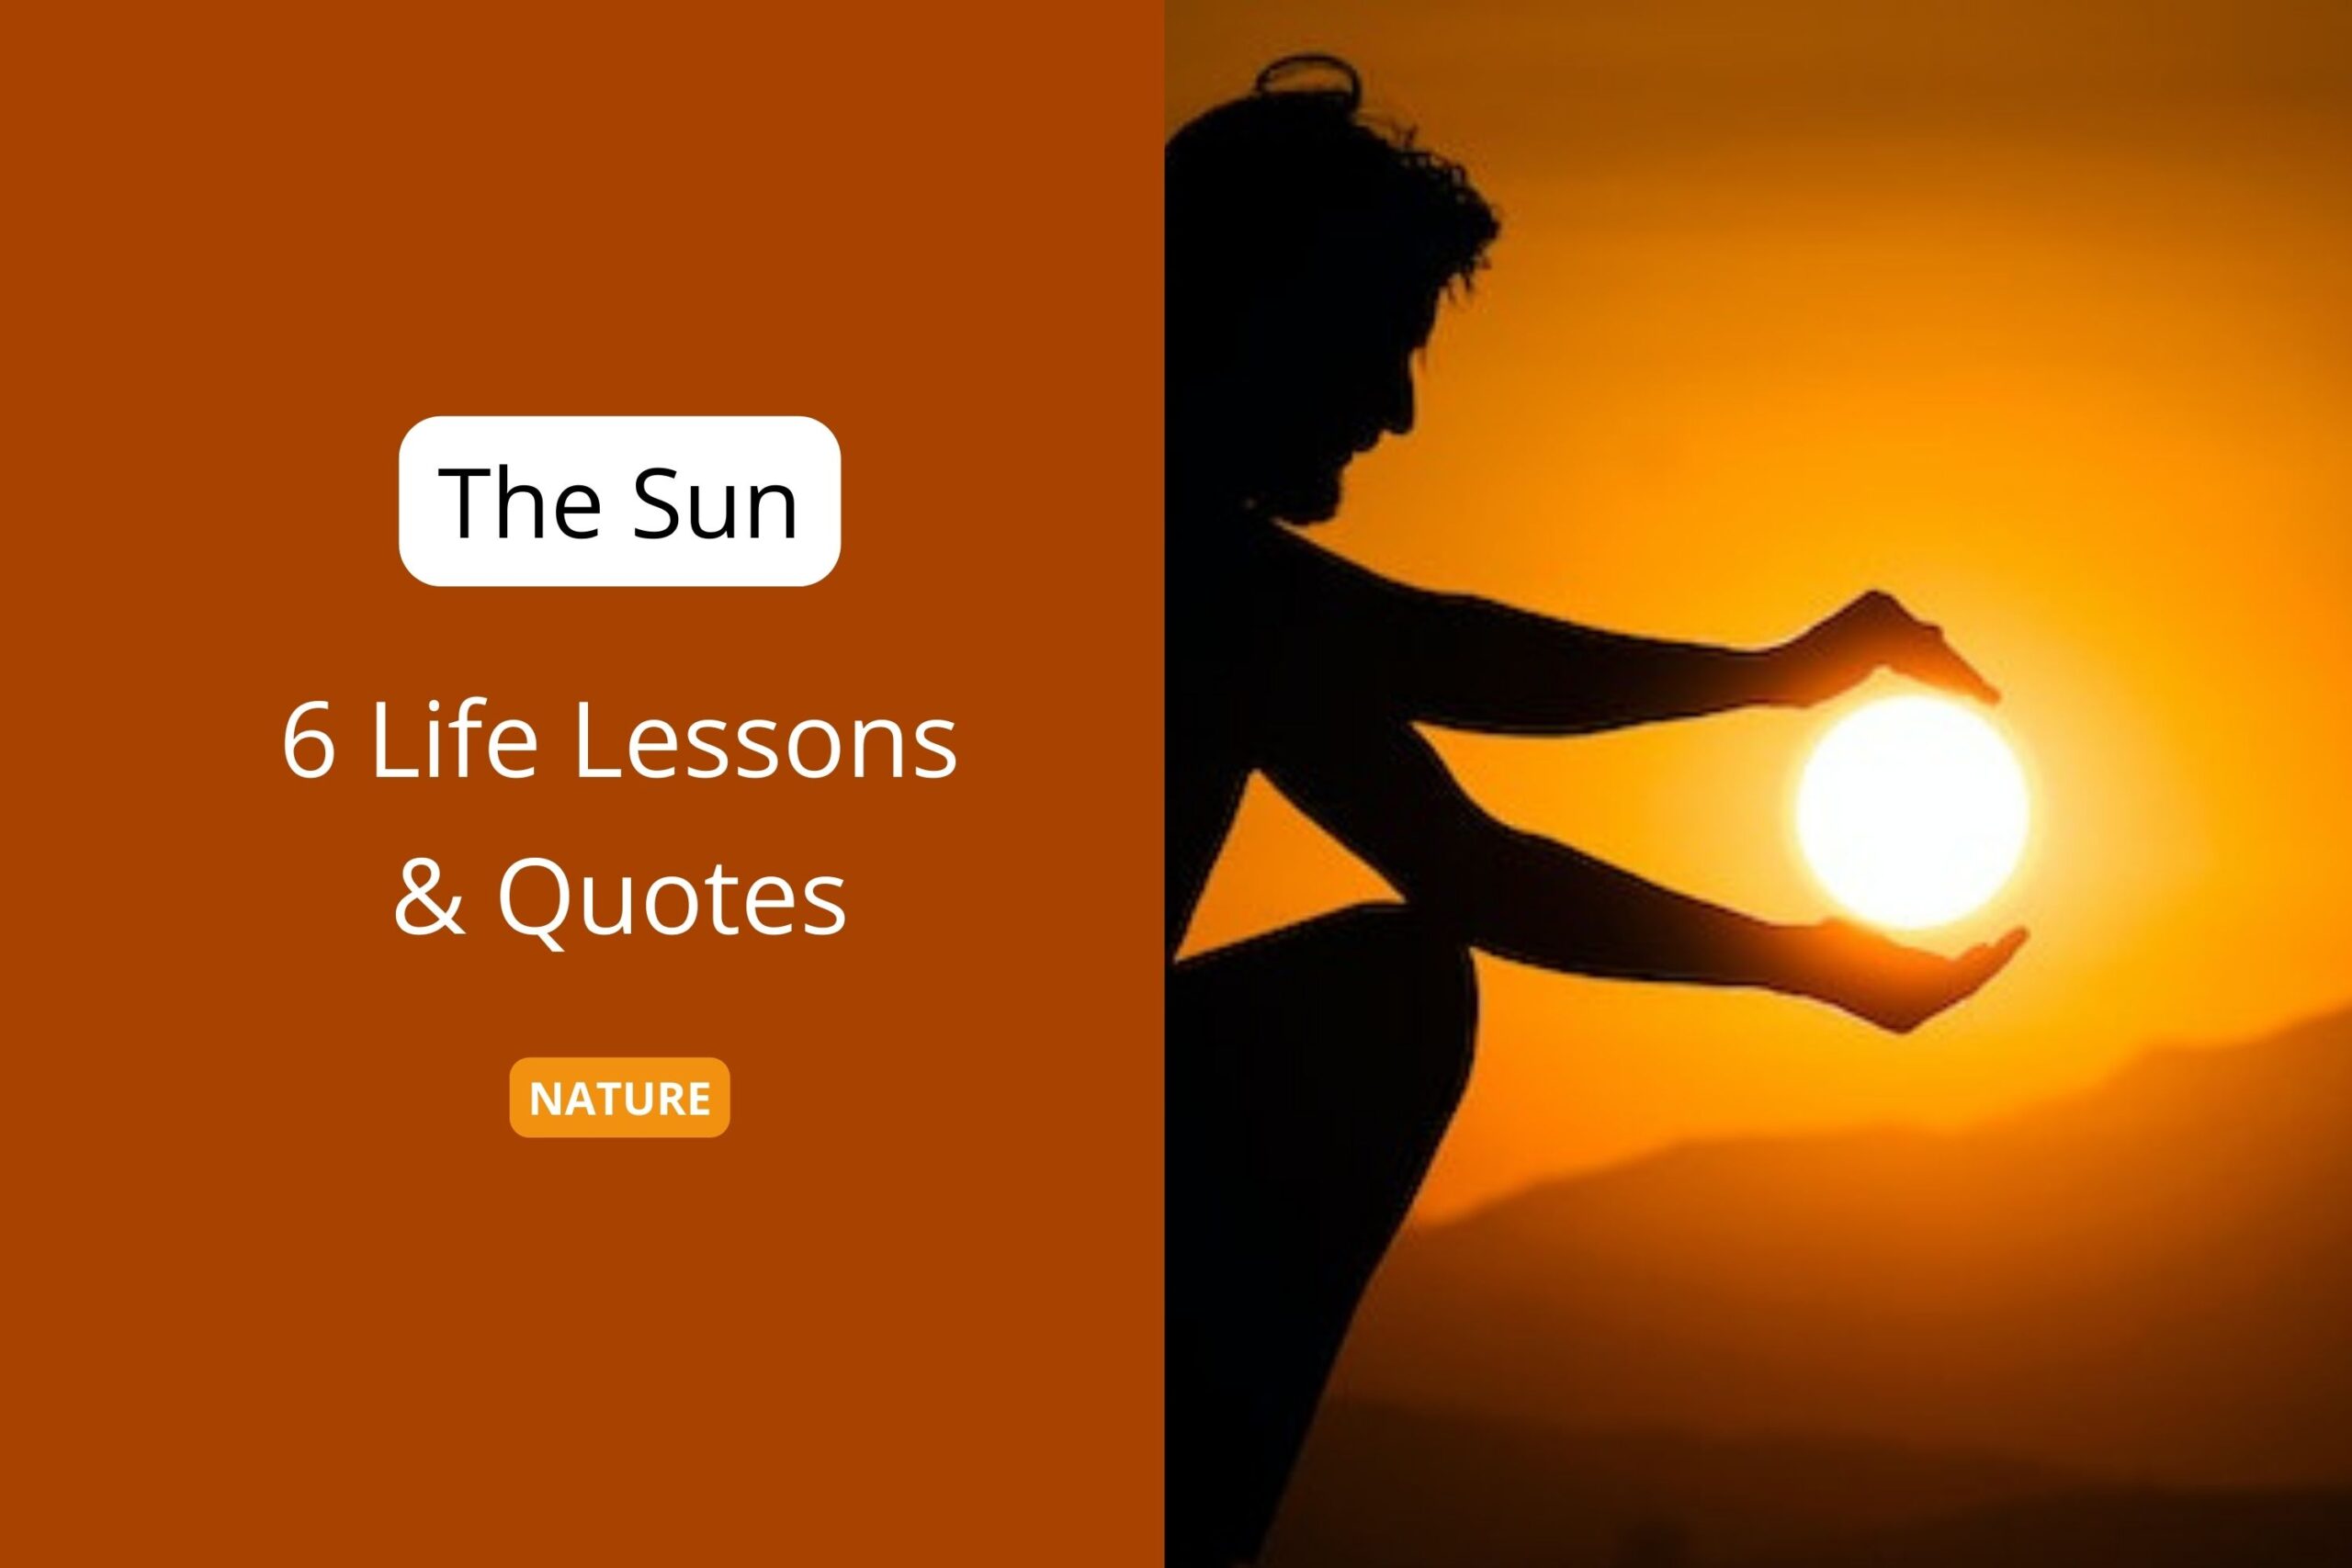 Life Lessons & Quotes We Can Learn from Sun